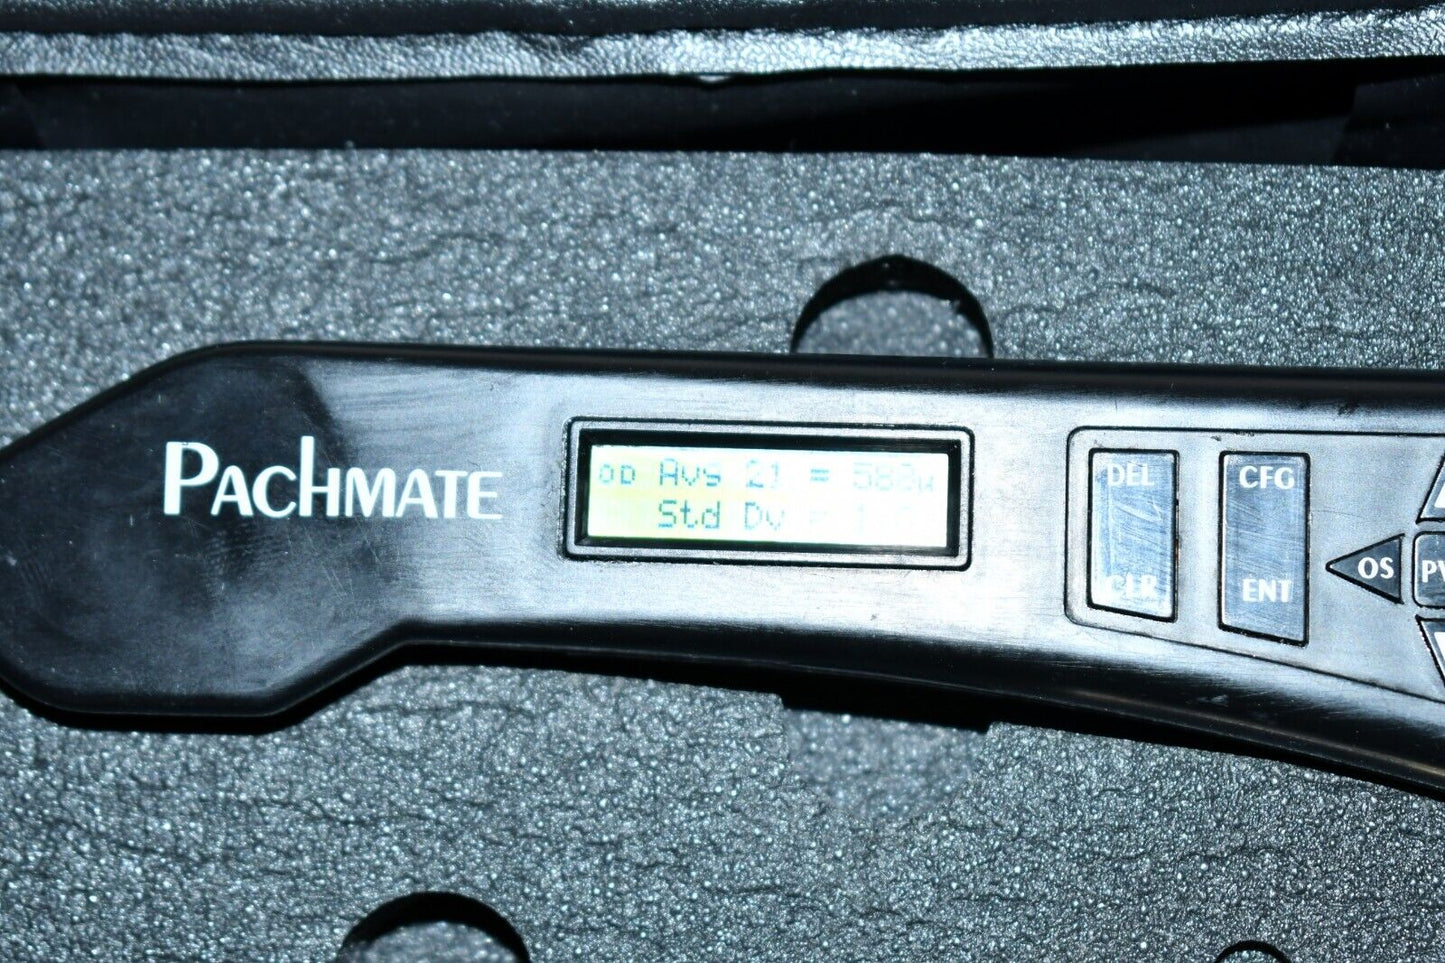 DGH Pachmate pachymeter